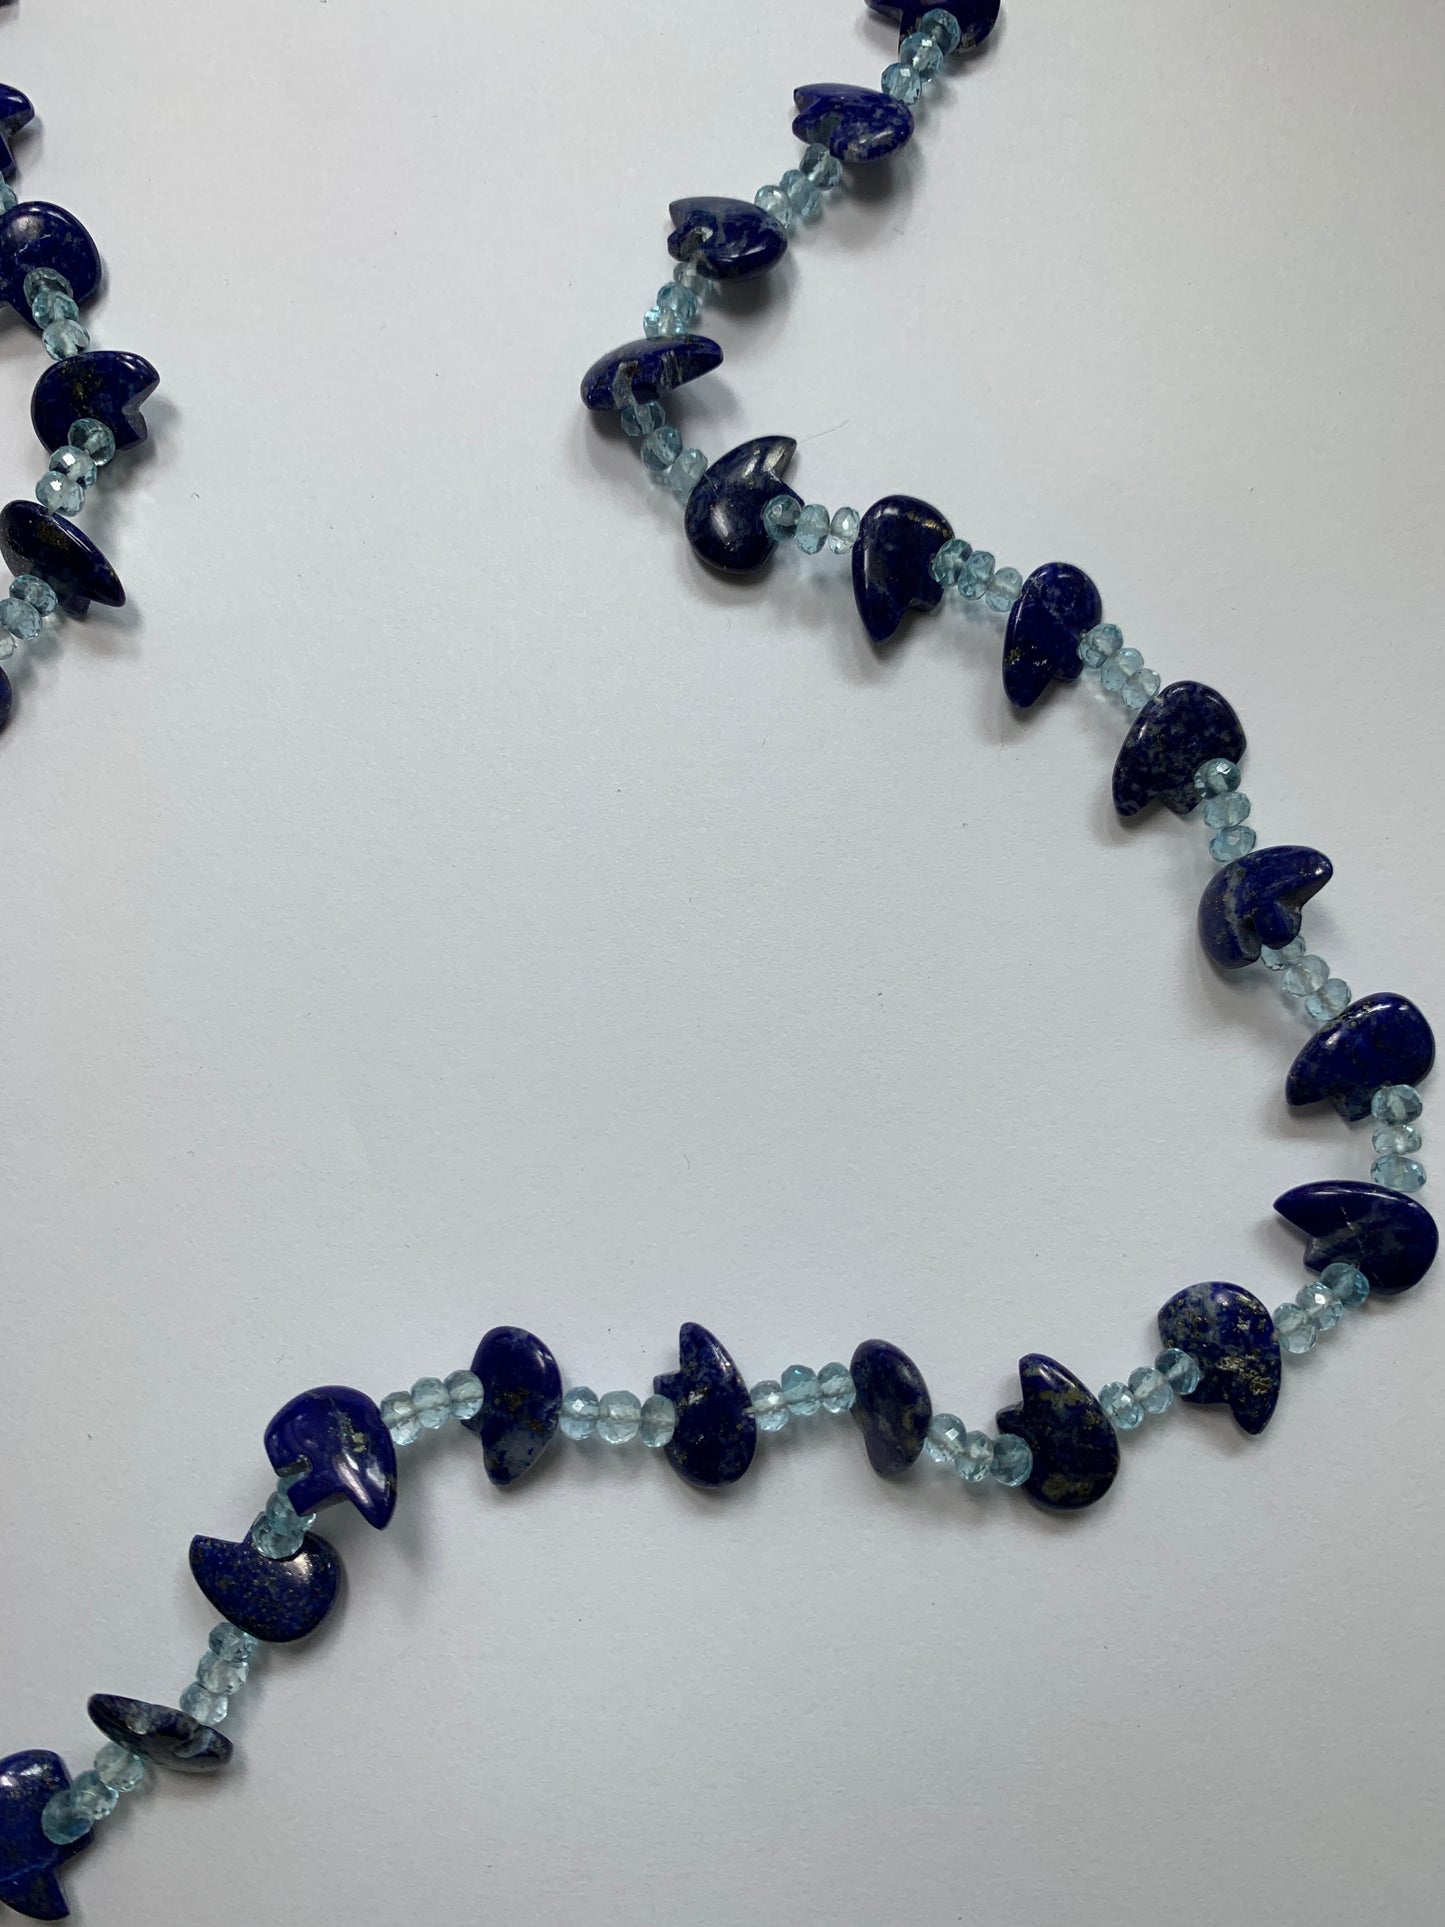 New Fine Blue Lapis Bear Fetishes and Fine Faceted Aquamarine Beads - Knotted Continuous Necklace - by Jenn Dewey